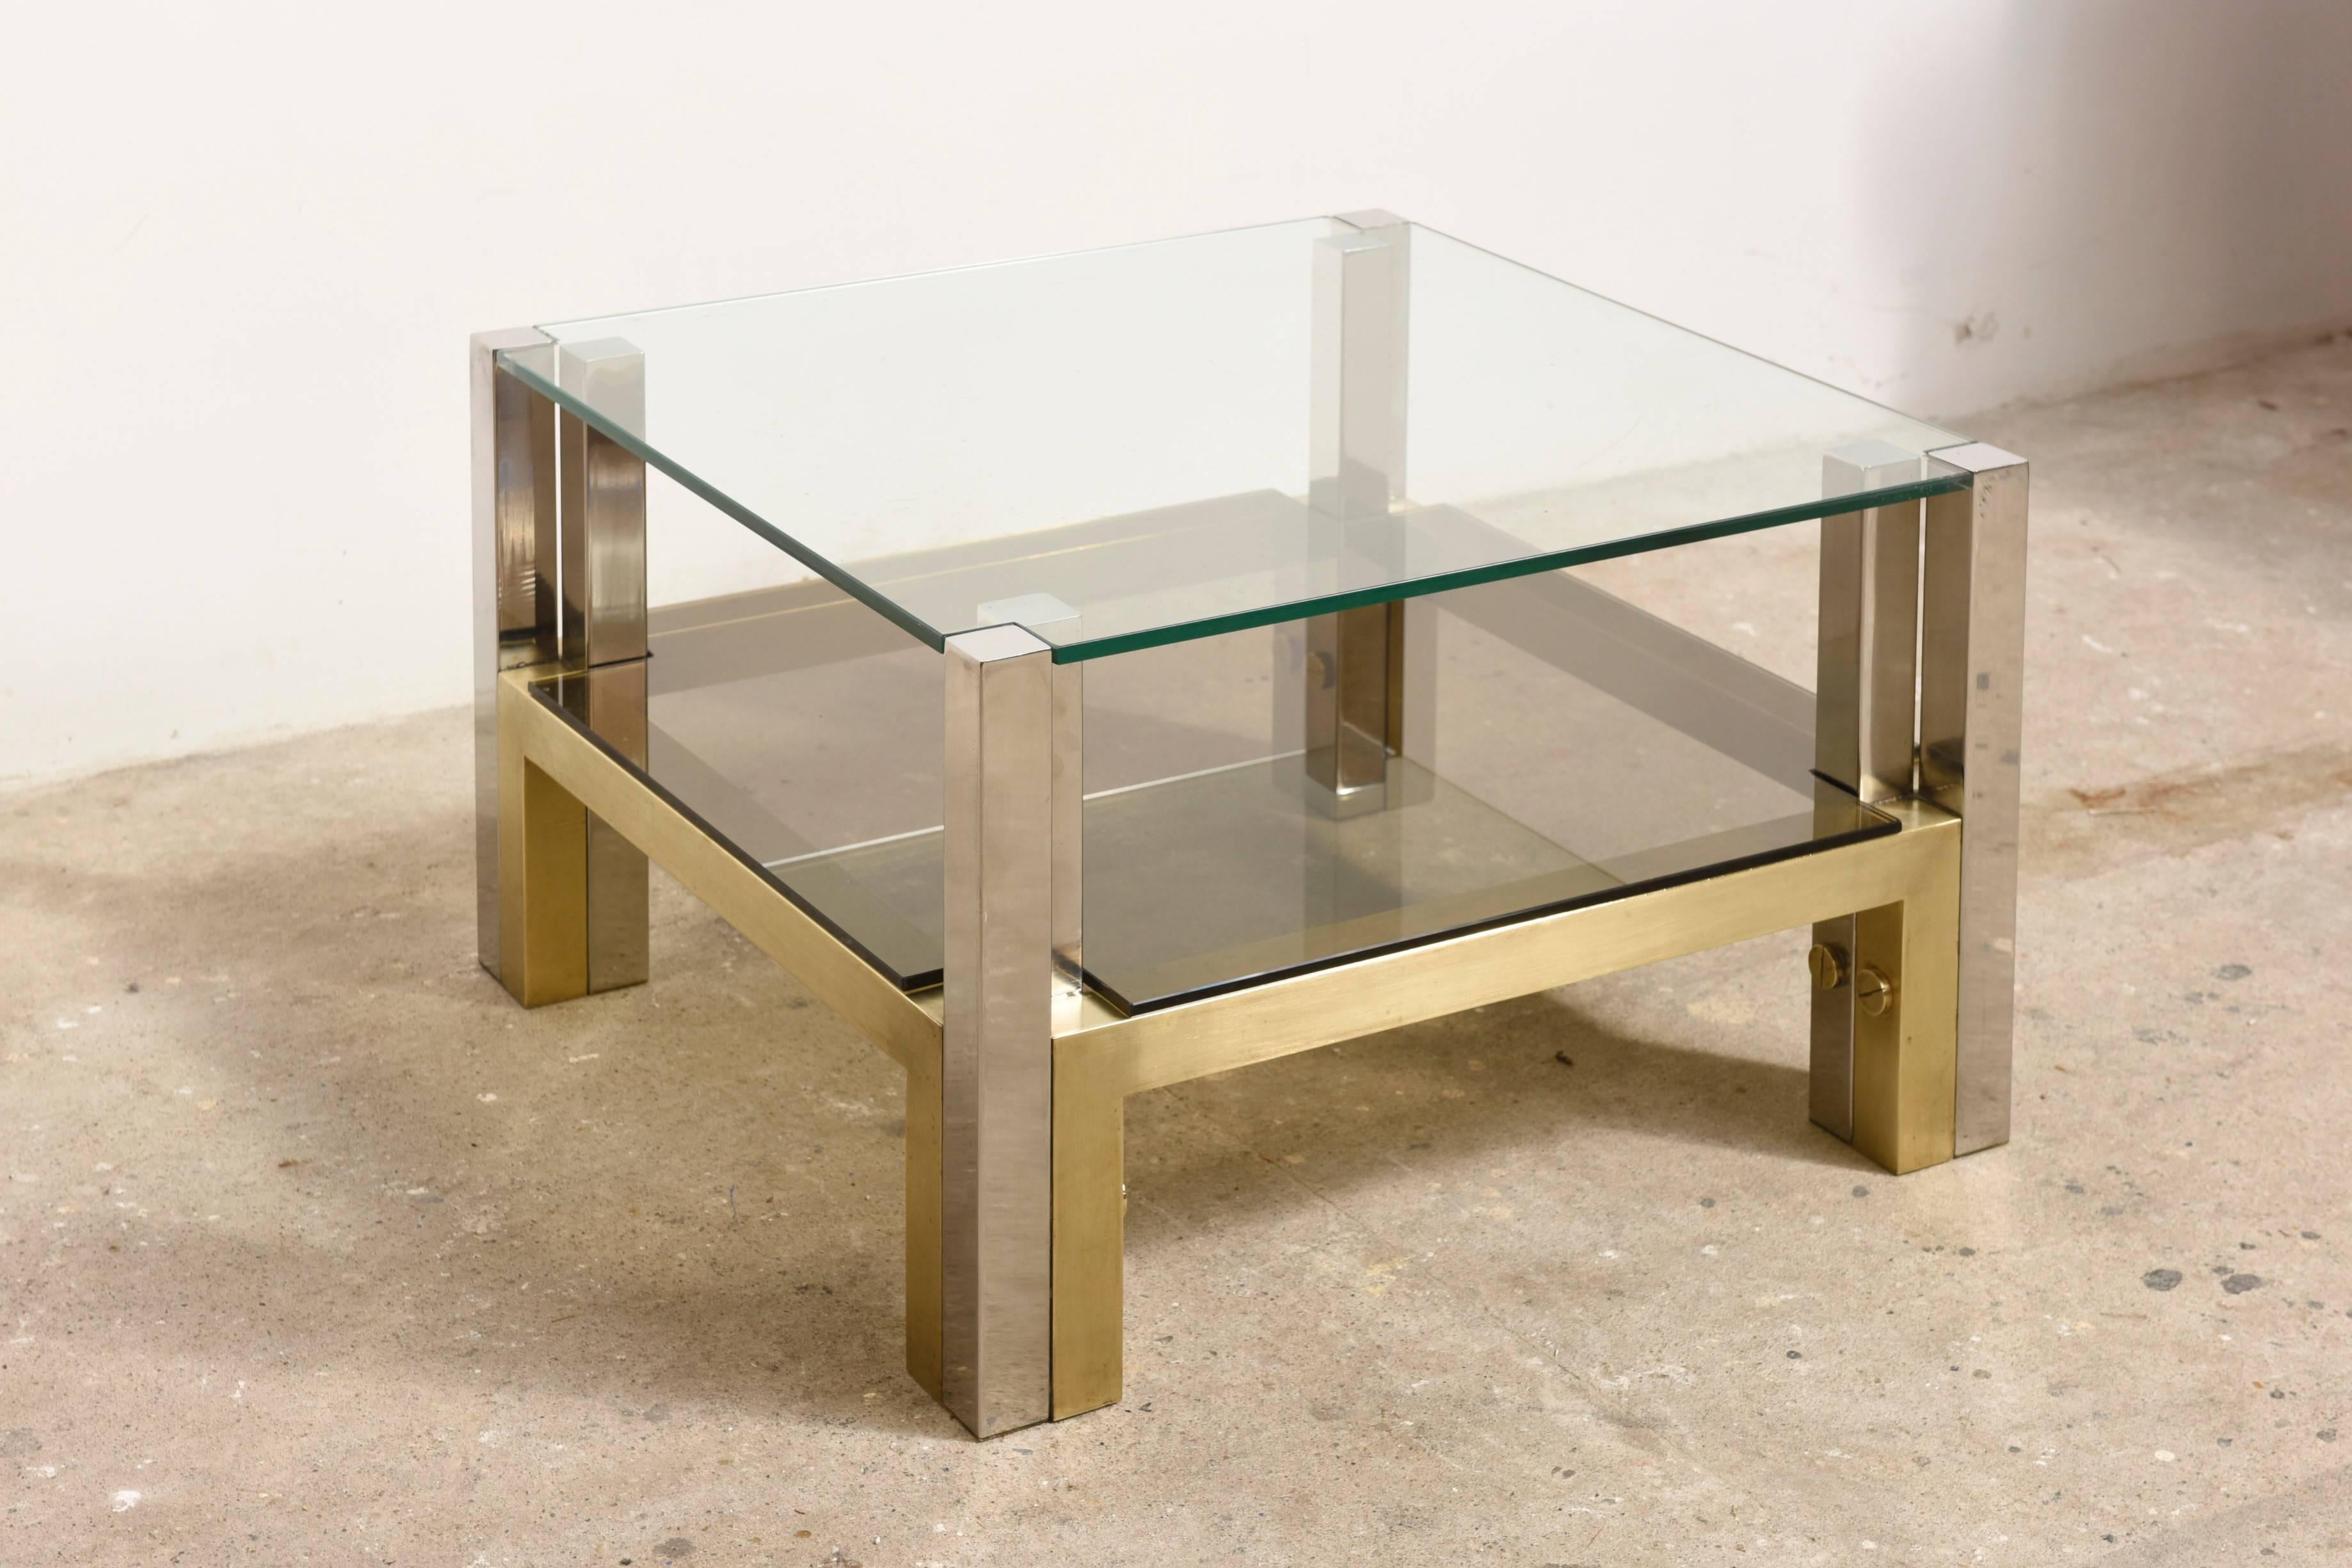 Side table in solid polished bronze and chrome-plated steel by Alfredo Freda, produced by Cittone Oggi .
The small table measures 65 x 65 x 40 cm,
Square stainless steel and brass structure with smoked and clear glass shelves.